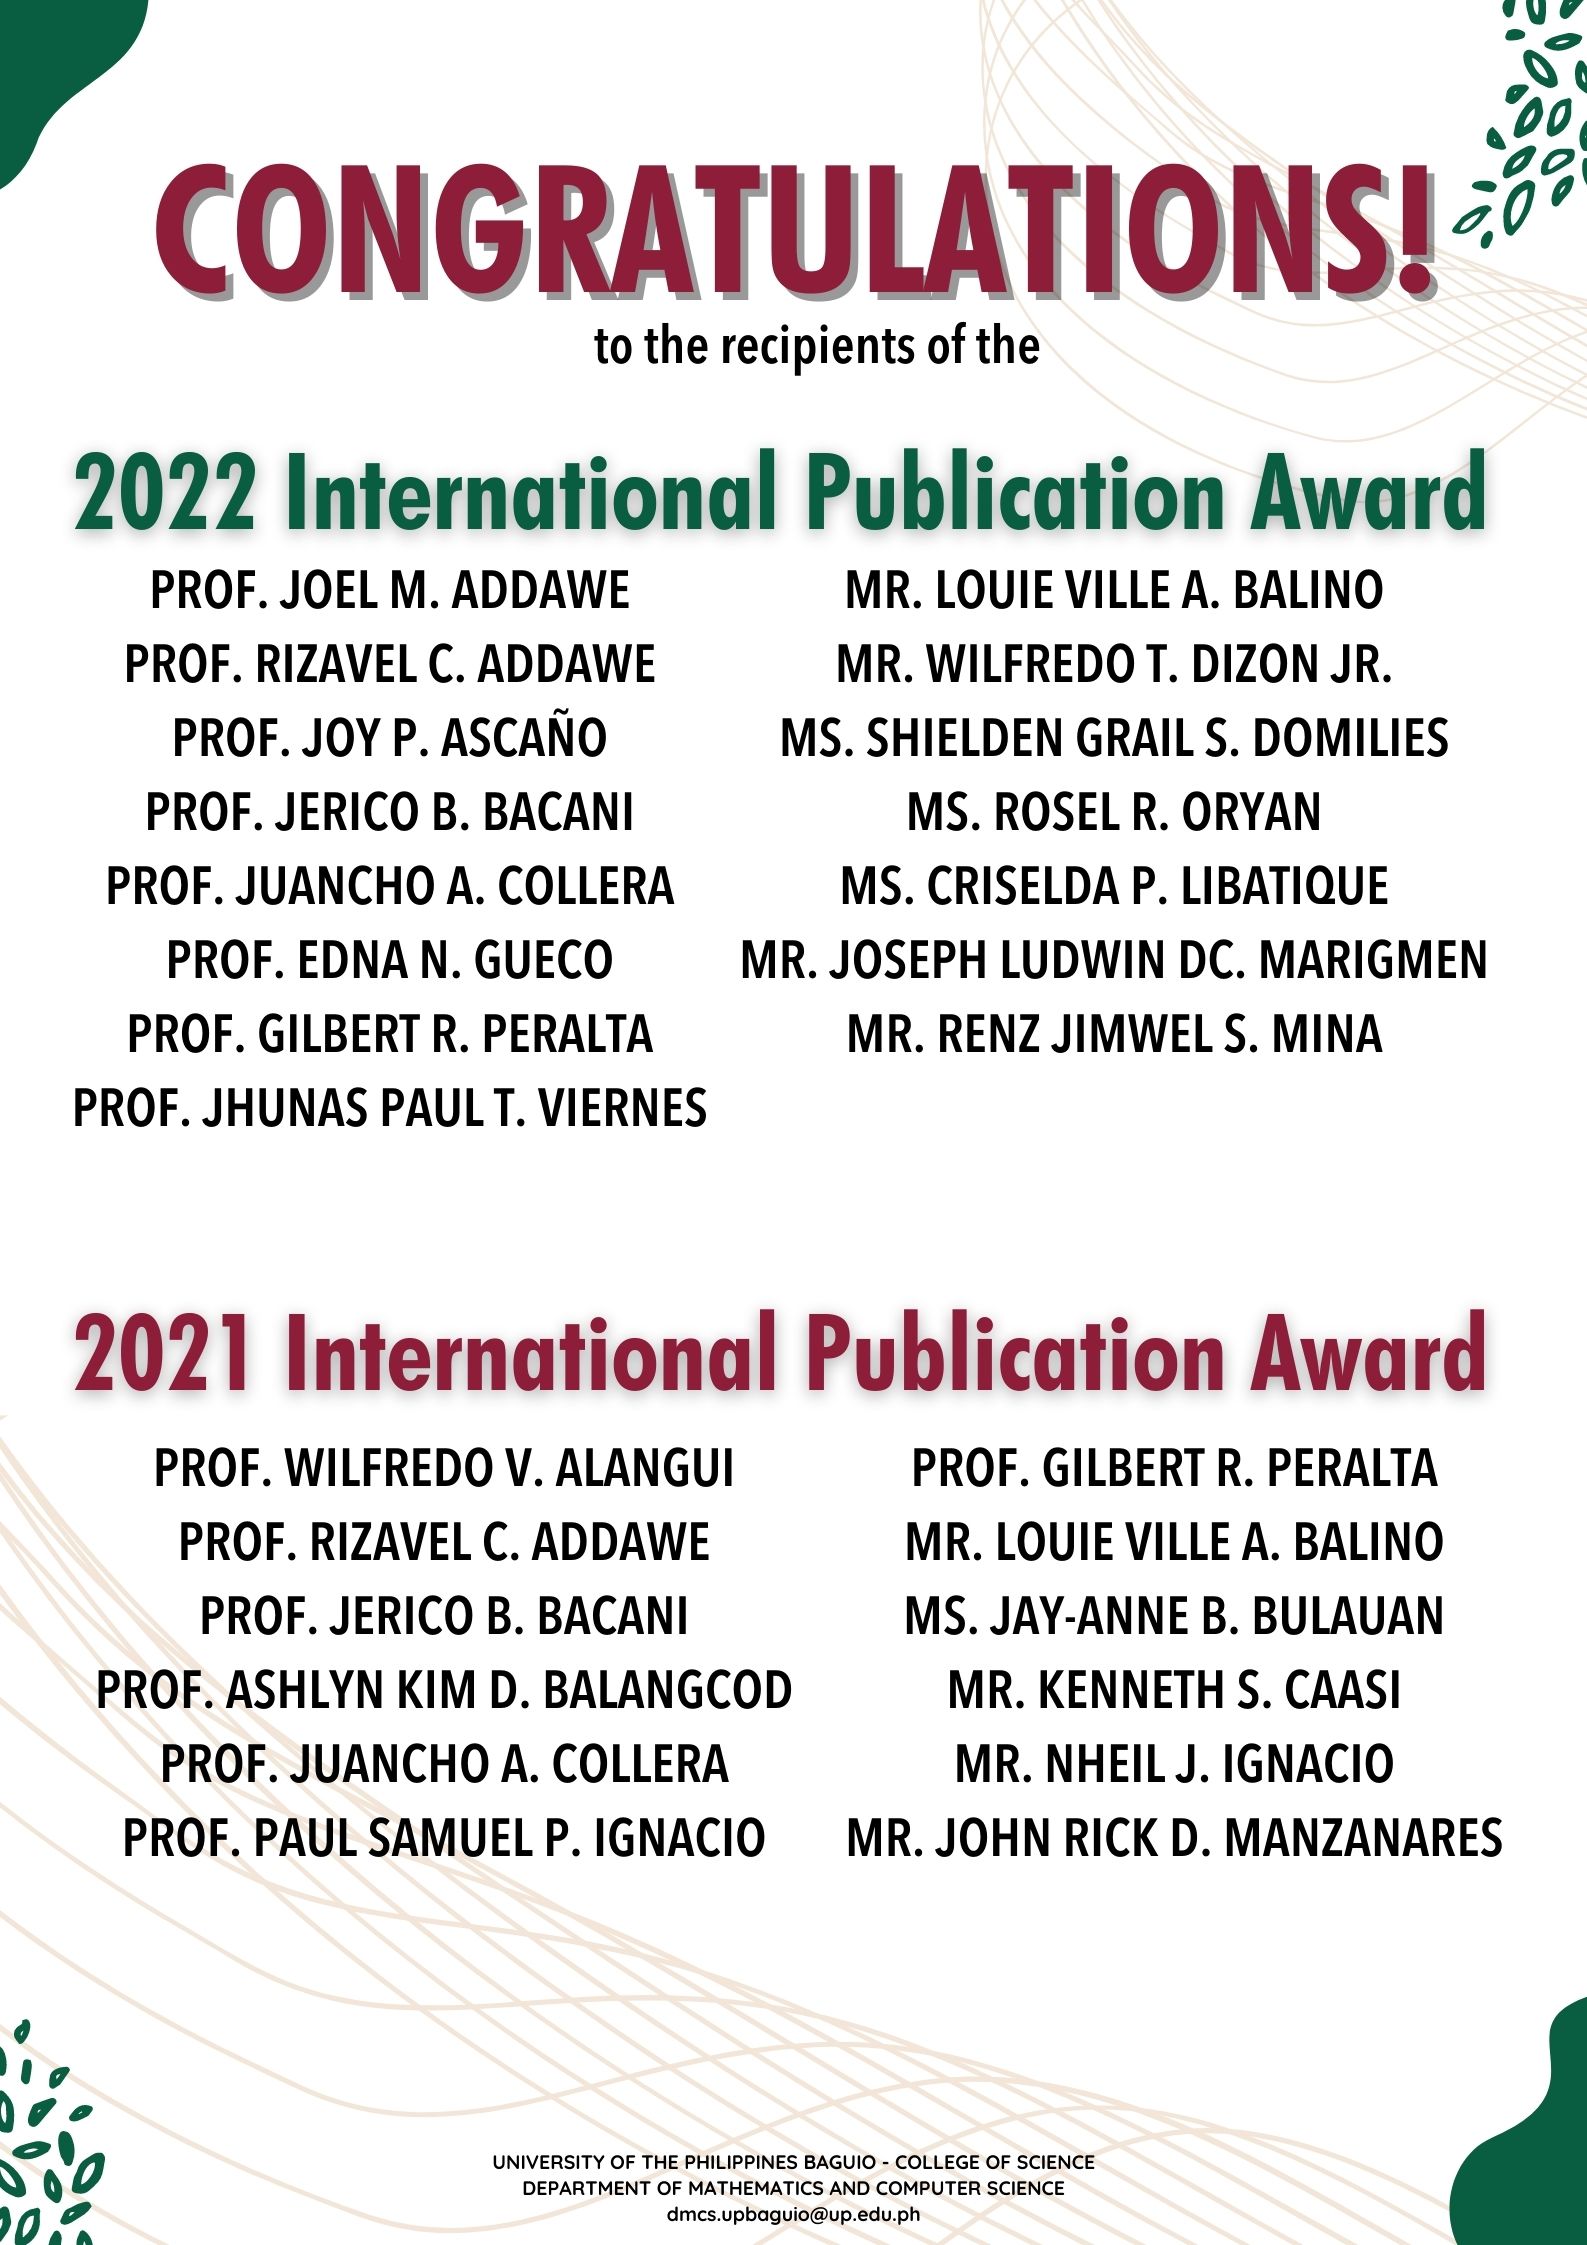 CONGRATULATIONS TO THE RECIPIENTS OF THE 2021 and 2022 INTERNATIONAL PUBLICATION AWARDS!